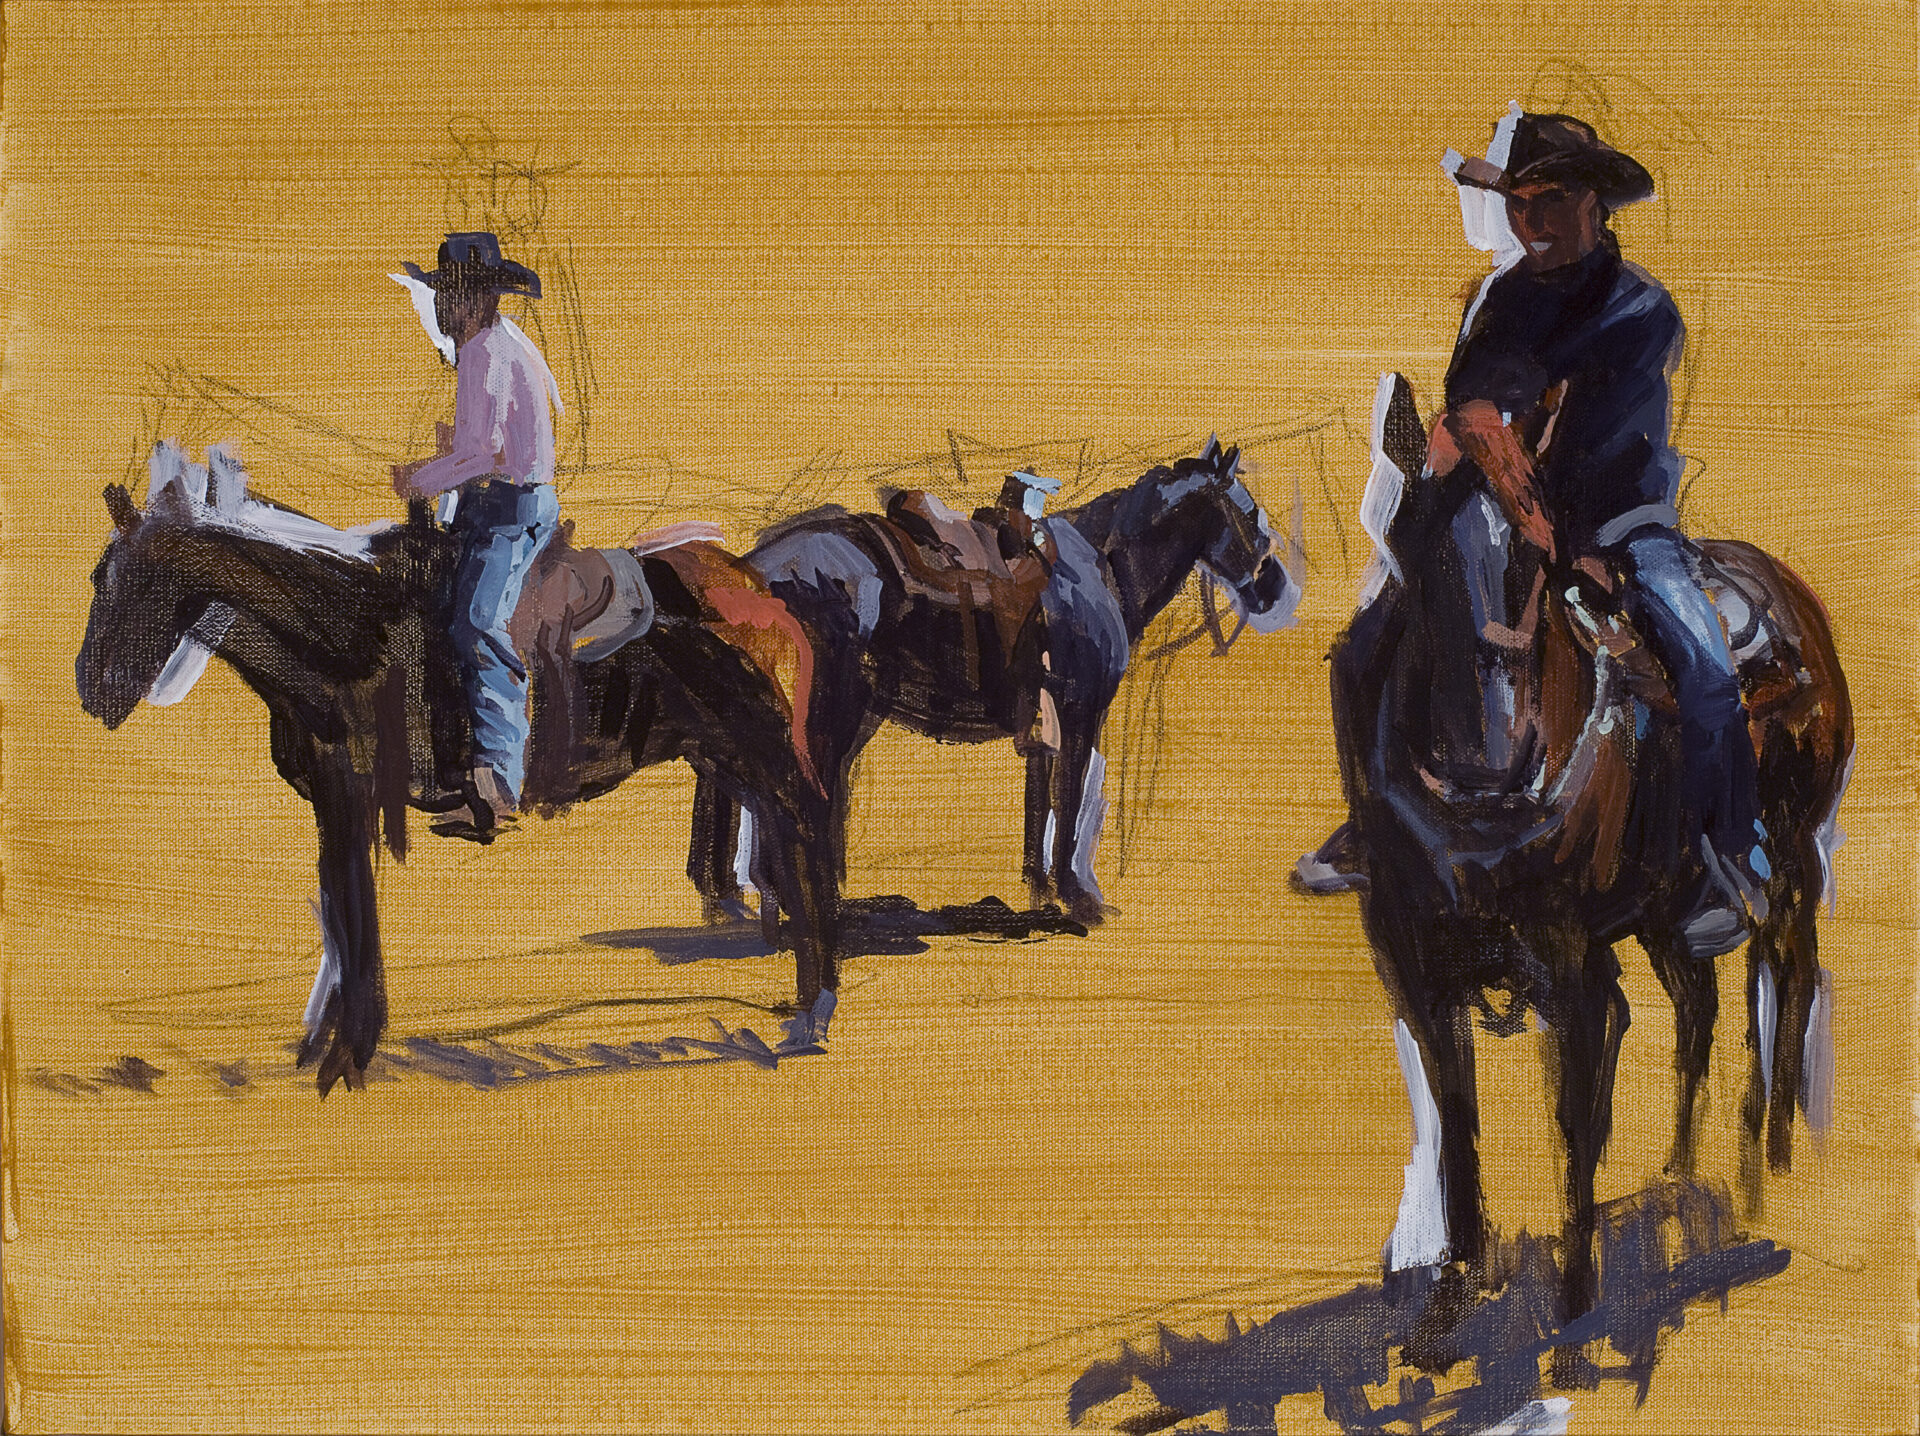 TWO COWBOYS<br>
2013<br>
18" x 24"
